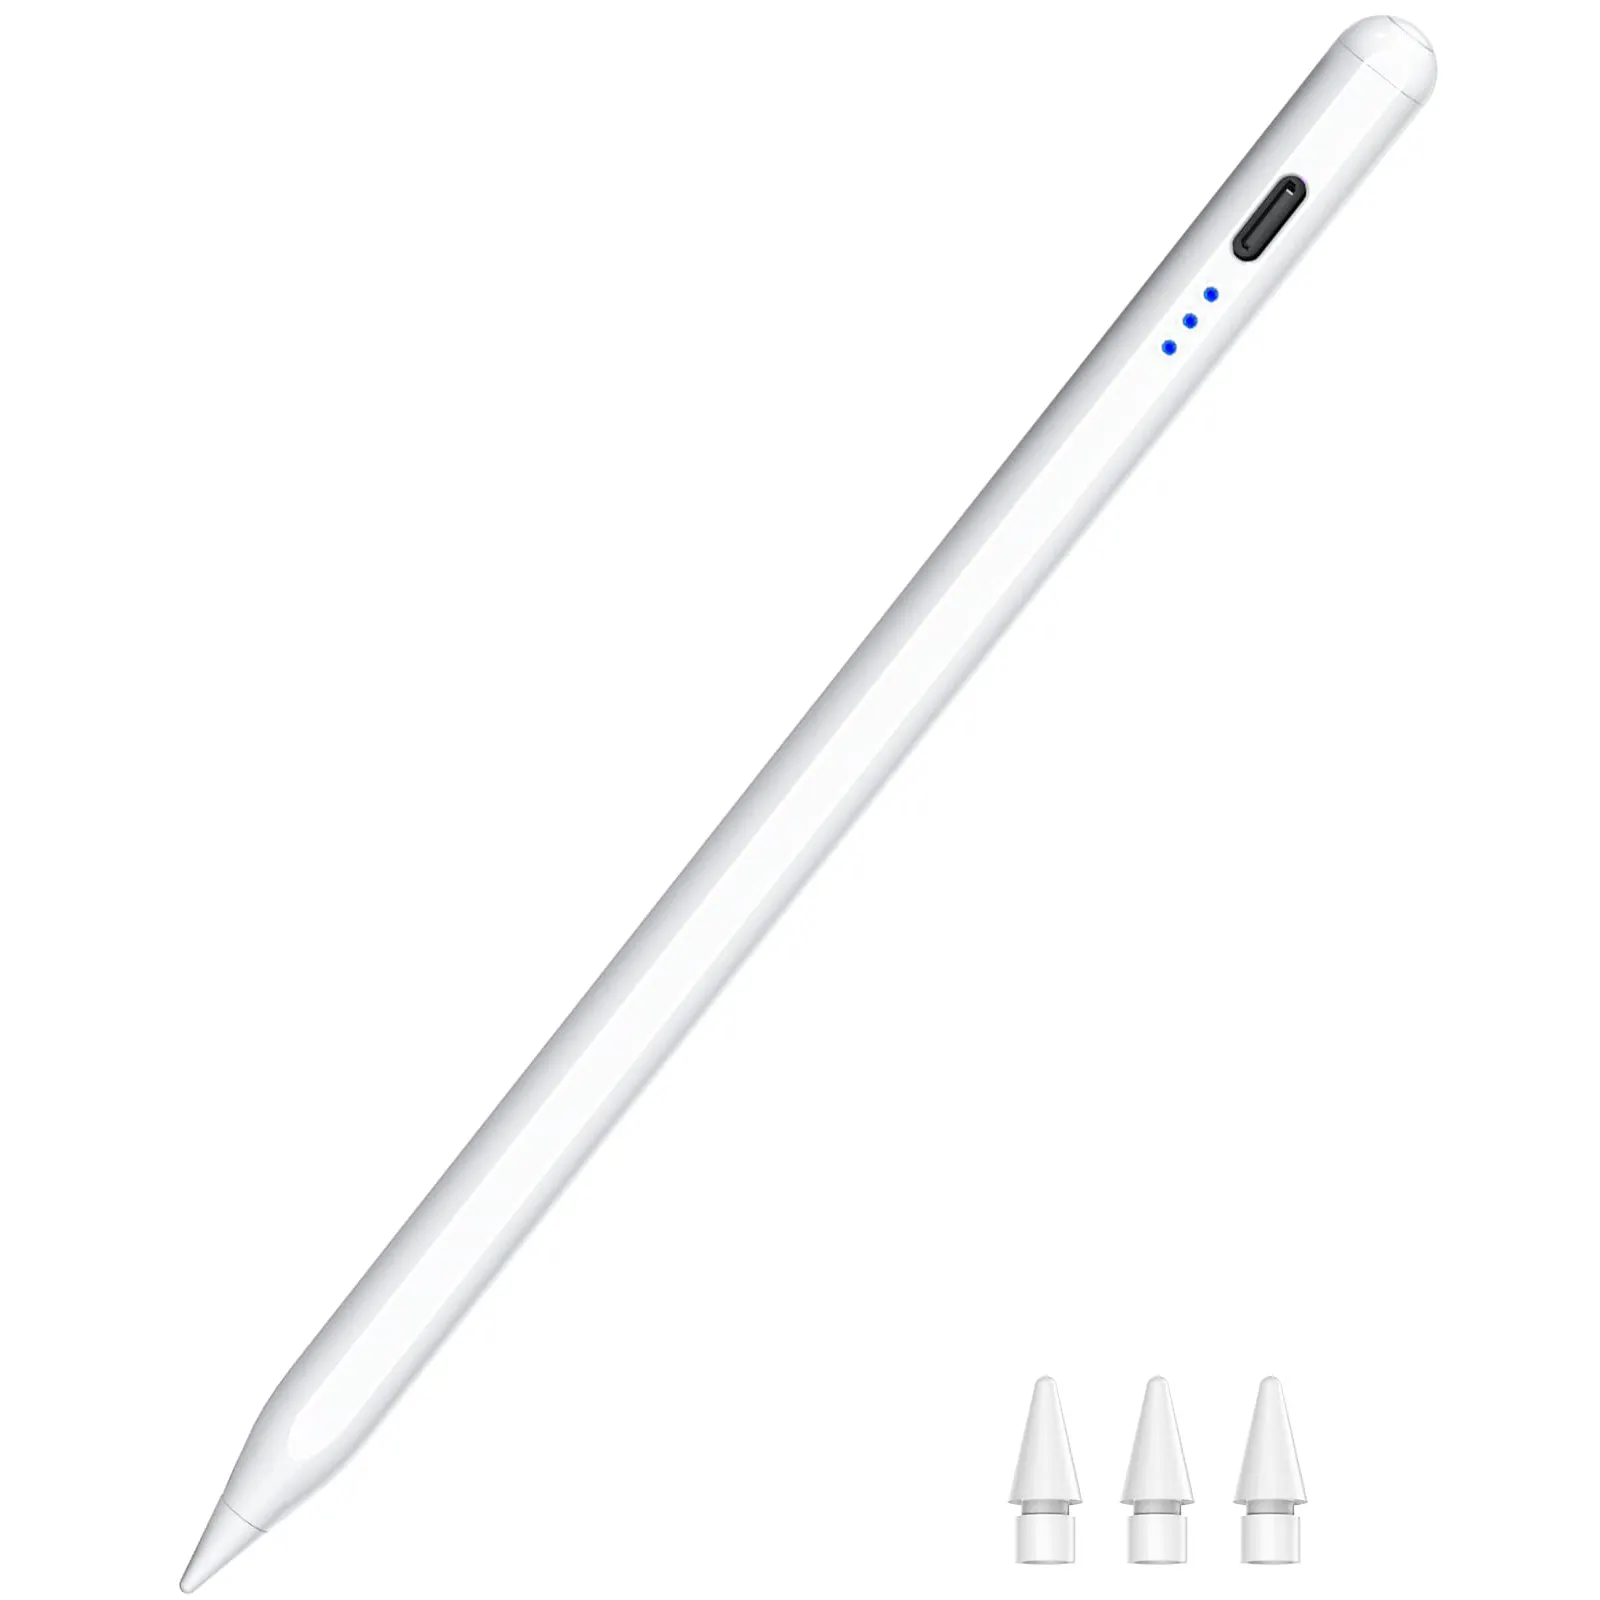 Touch Switch Stylus Pen For Ipad Android Tablet Palm Rejection & Universal 2 In 1 Mode Active Pencil Stylus RSTY-3